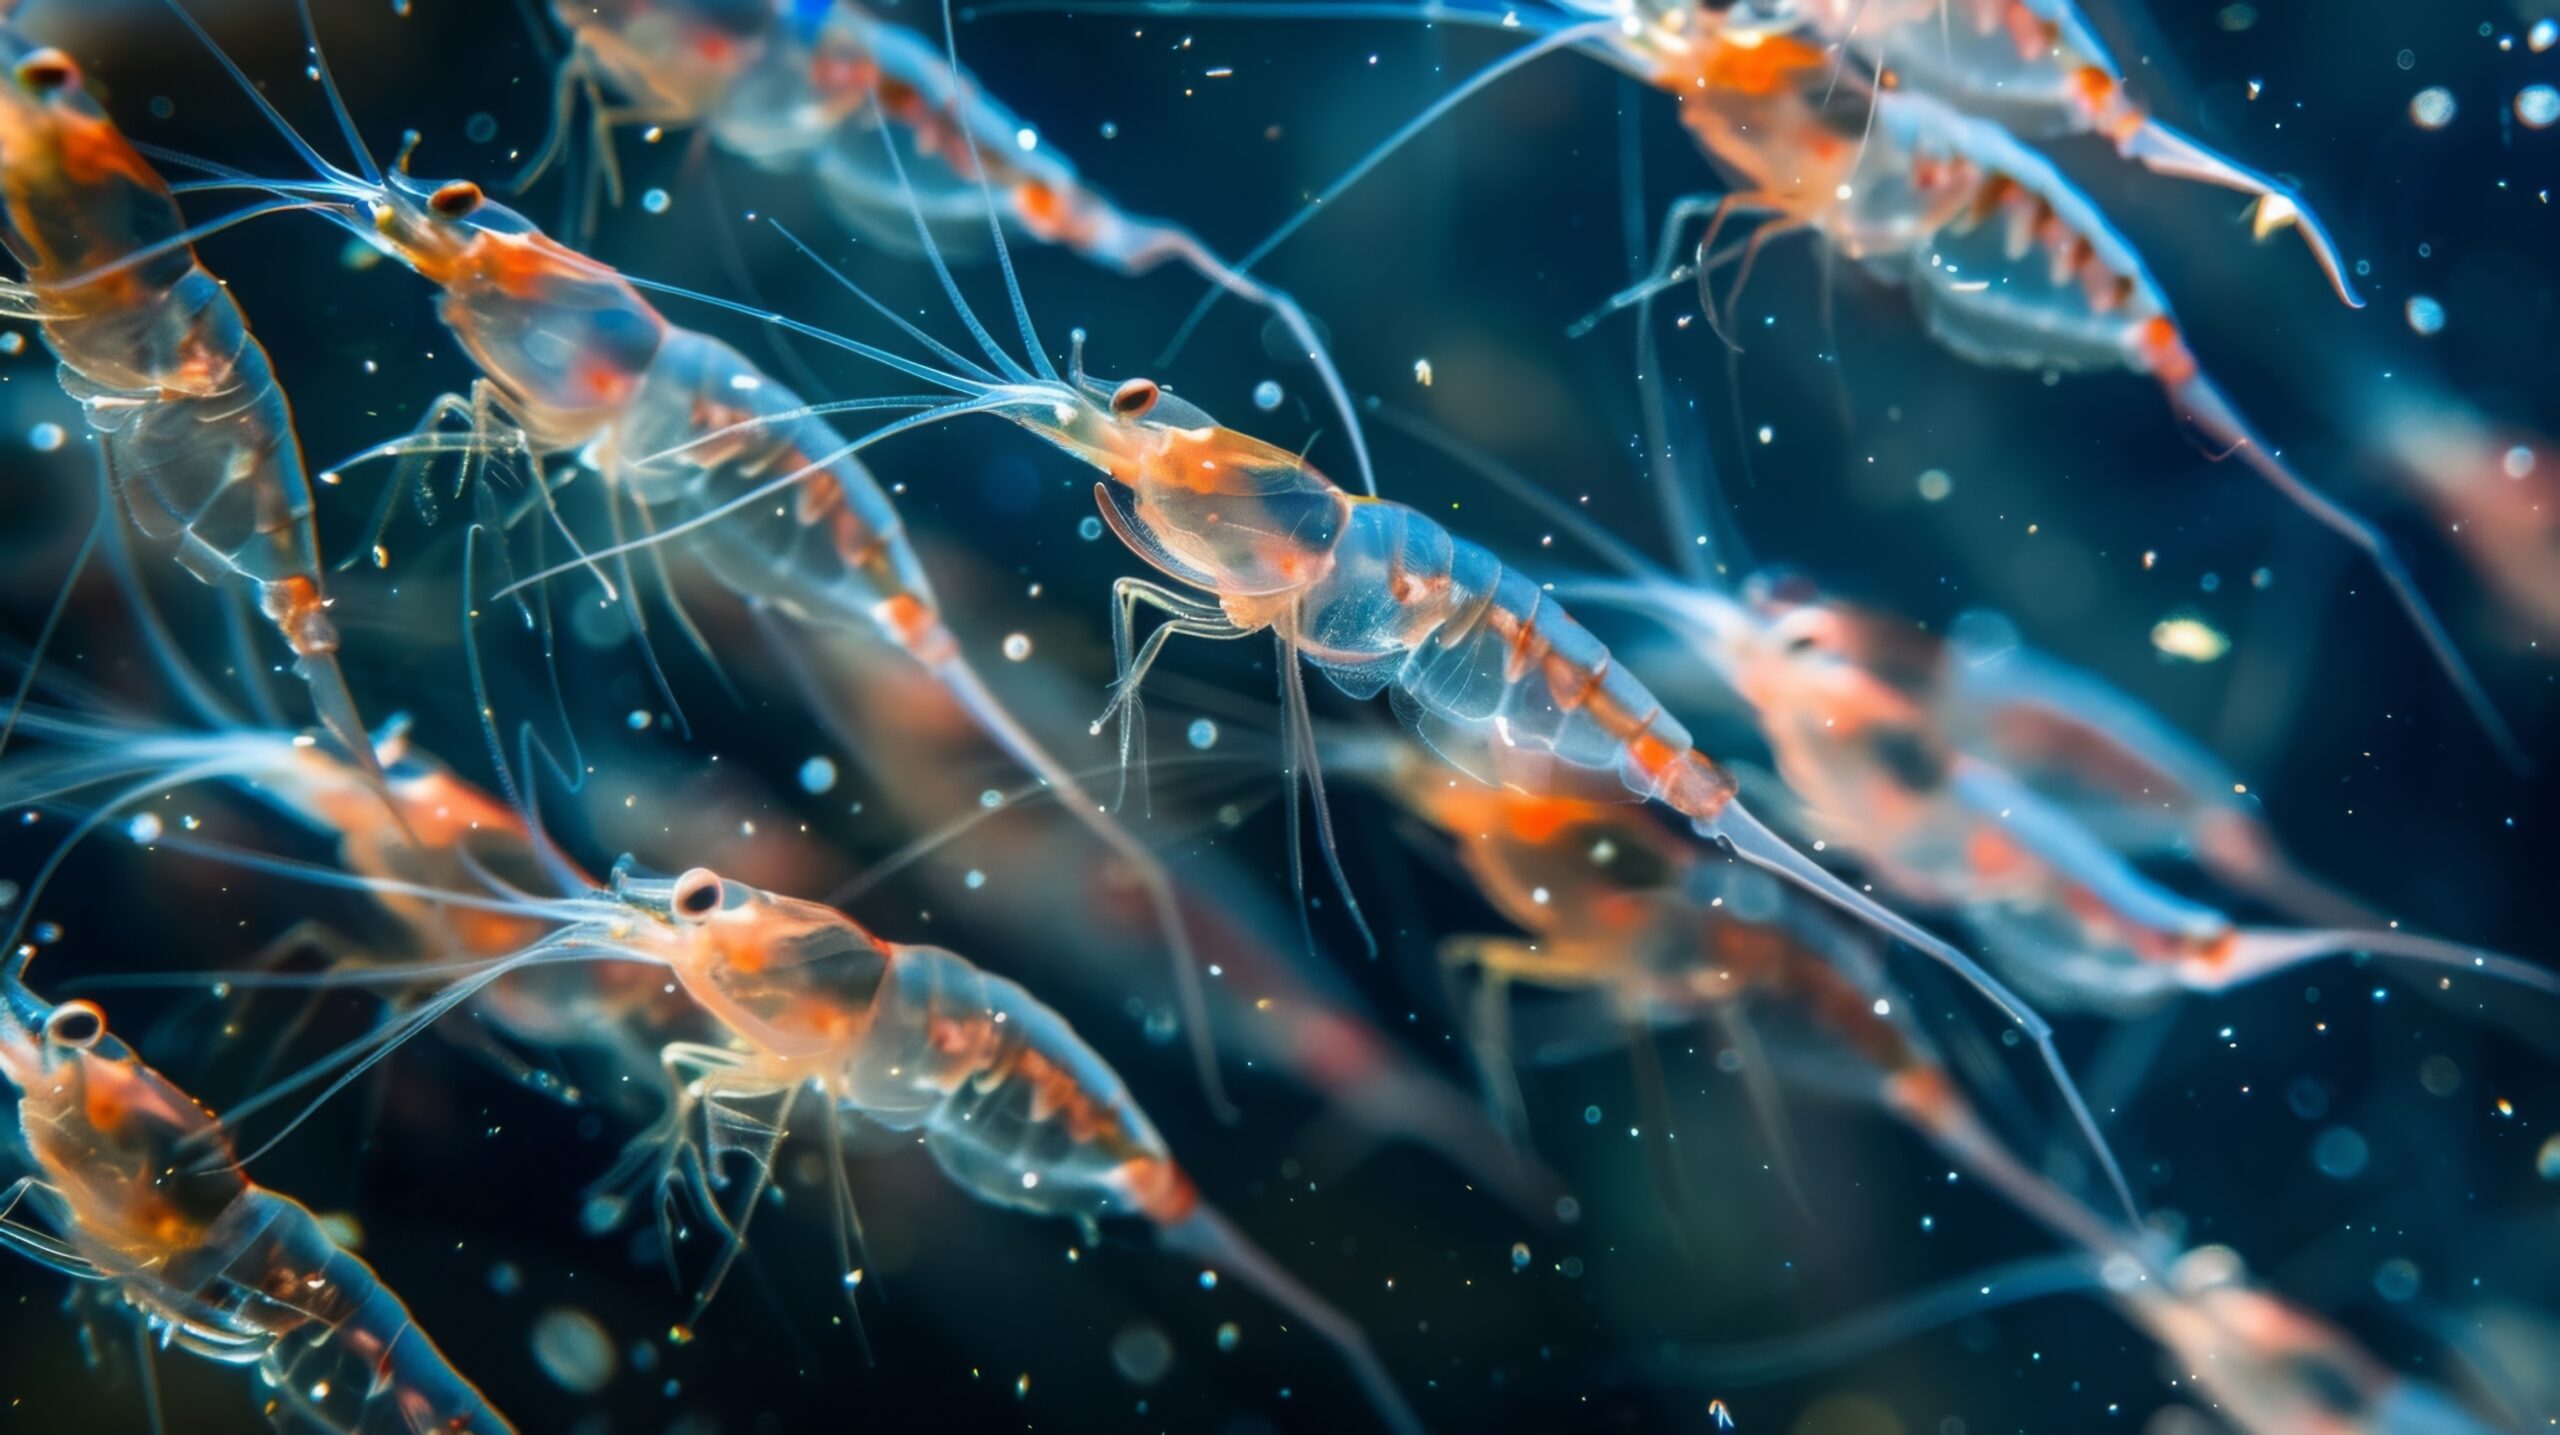 Krill Swarms Are So Massive They’re Visible from Space